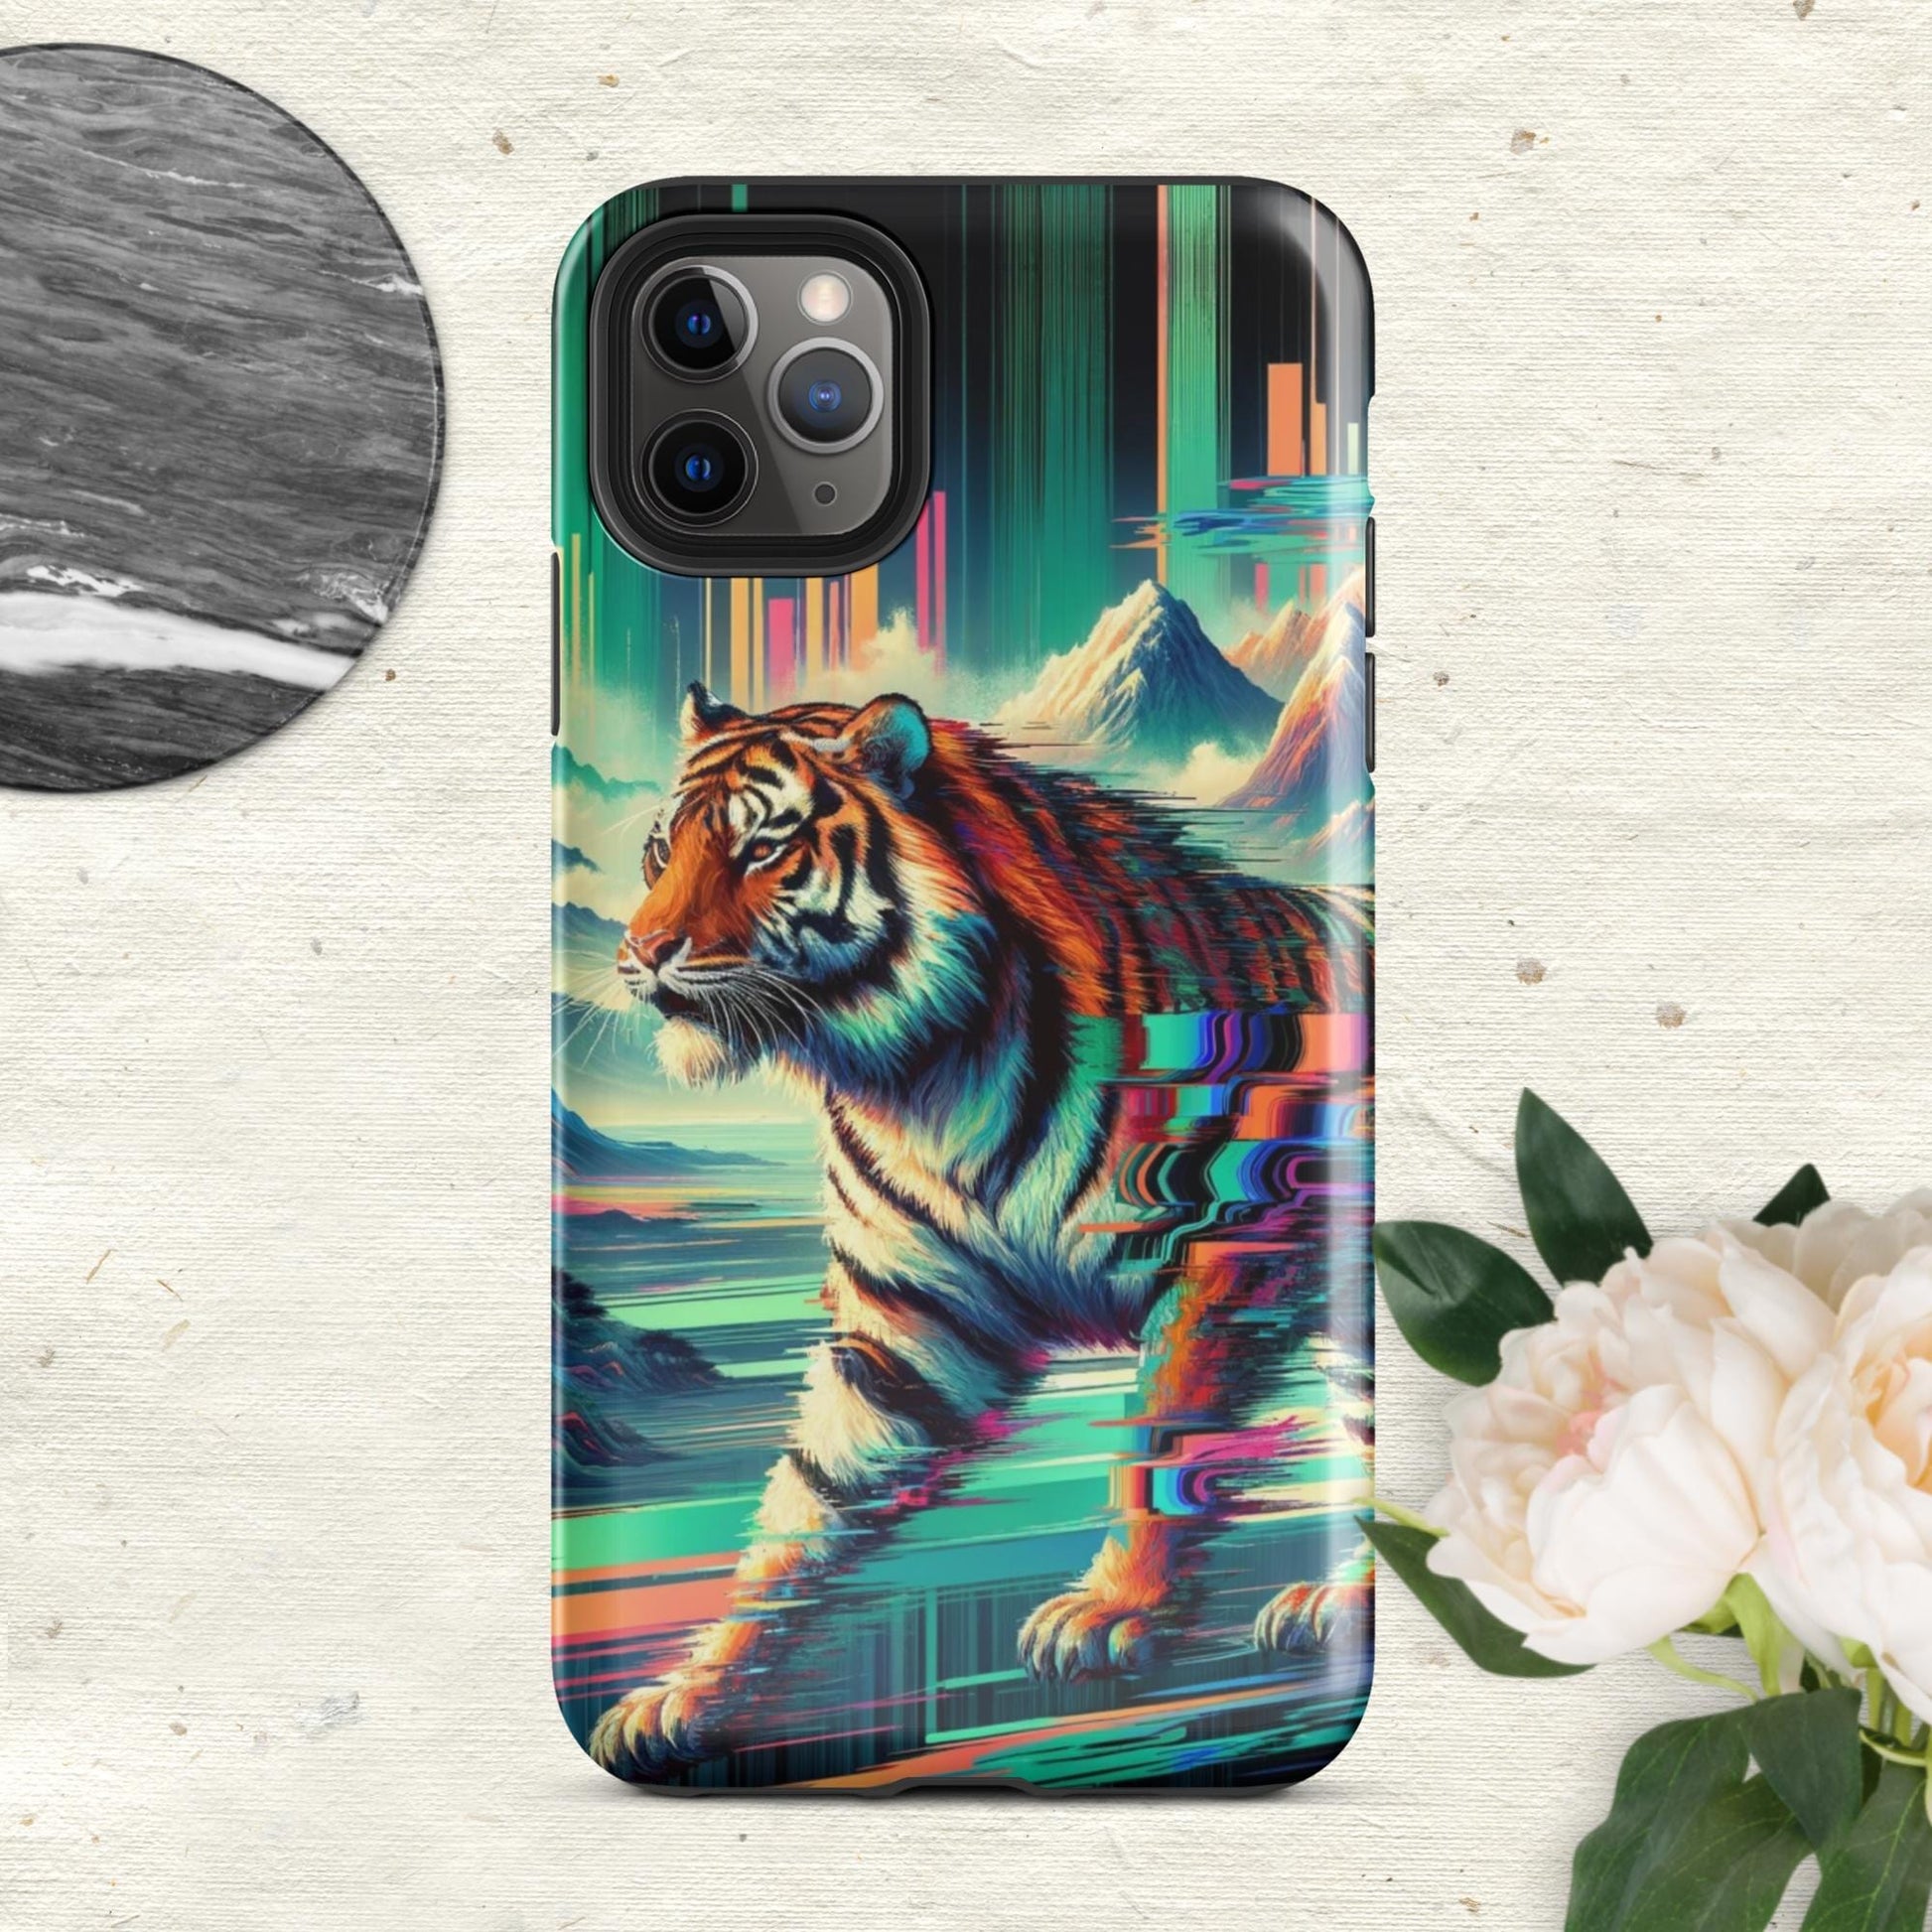 The Hologram Hook Up Glossy / iPhone 11 Pro Max Tiger Glitch Tough Case for iPhone®